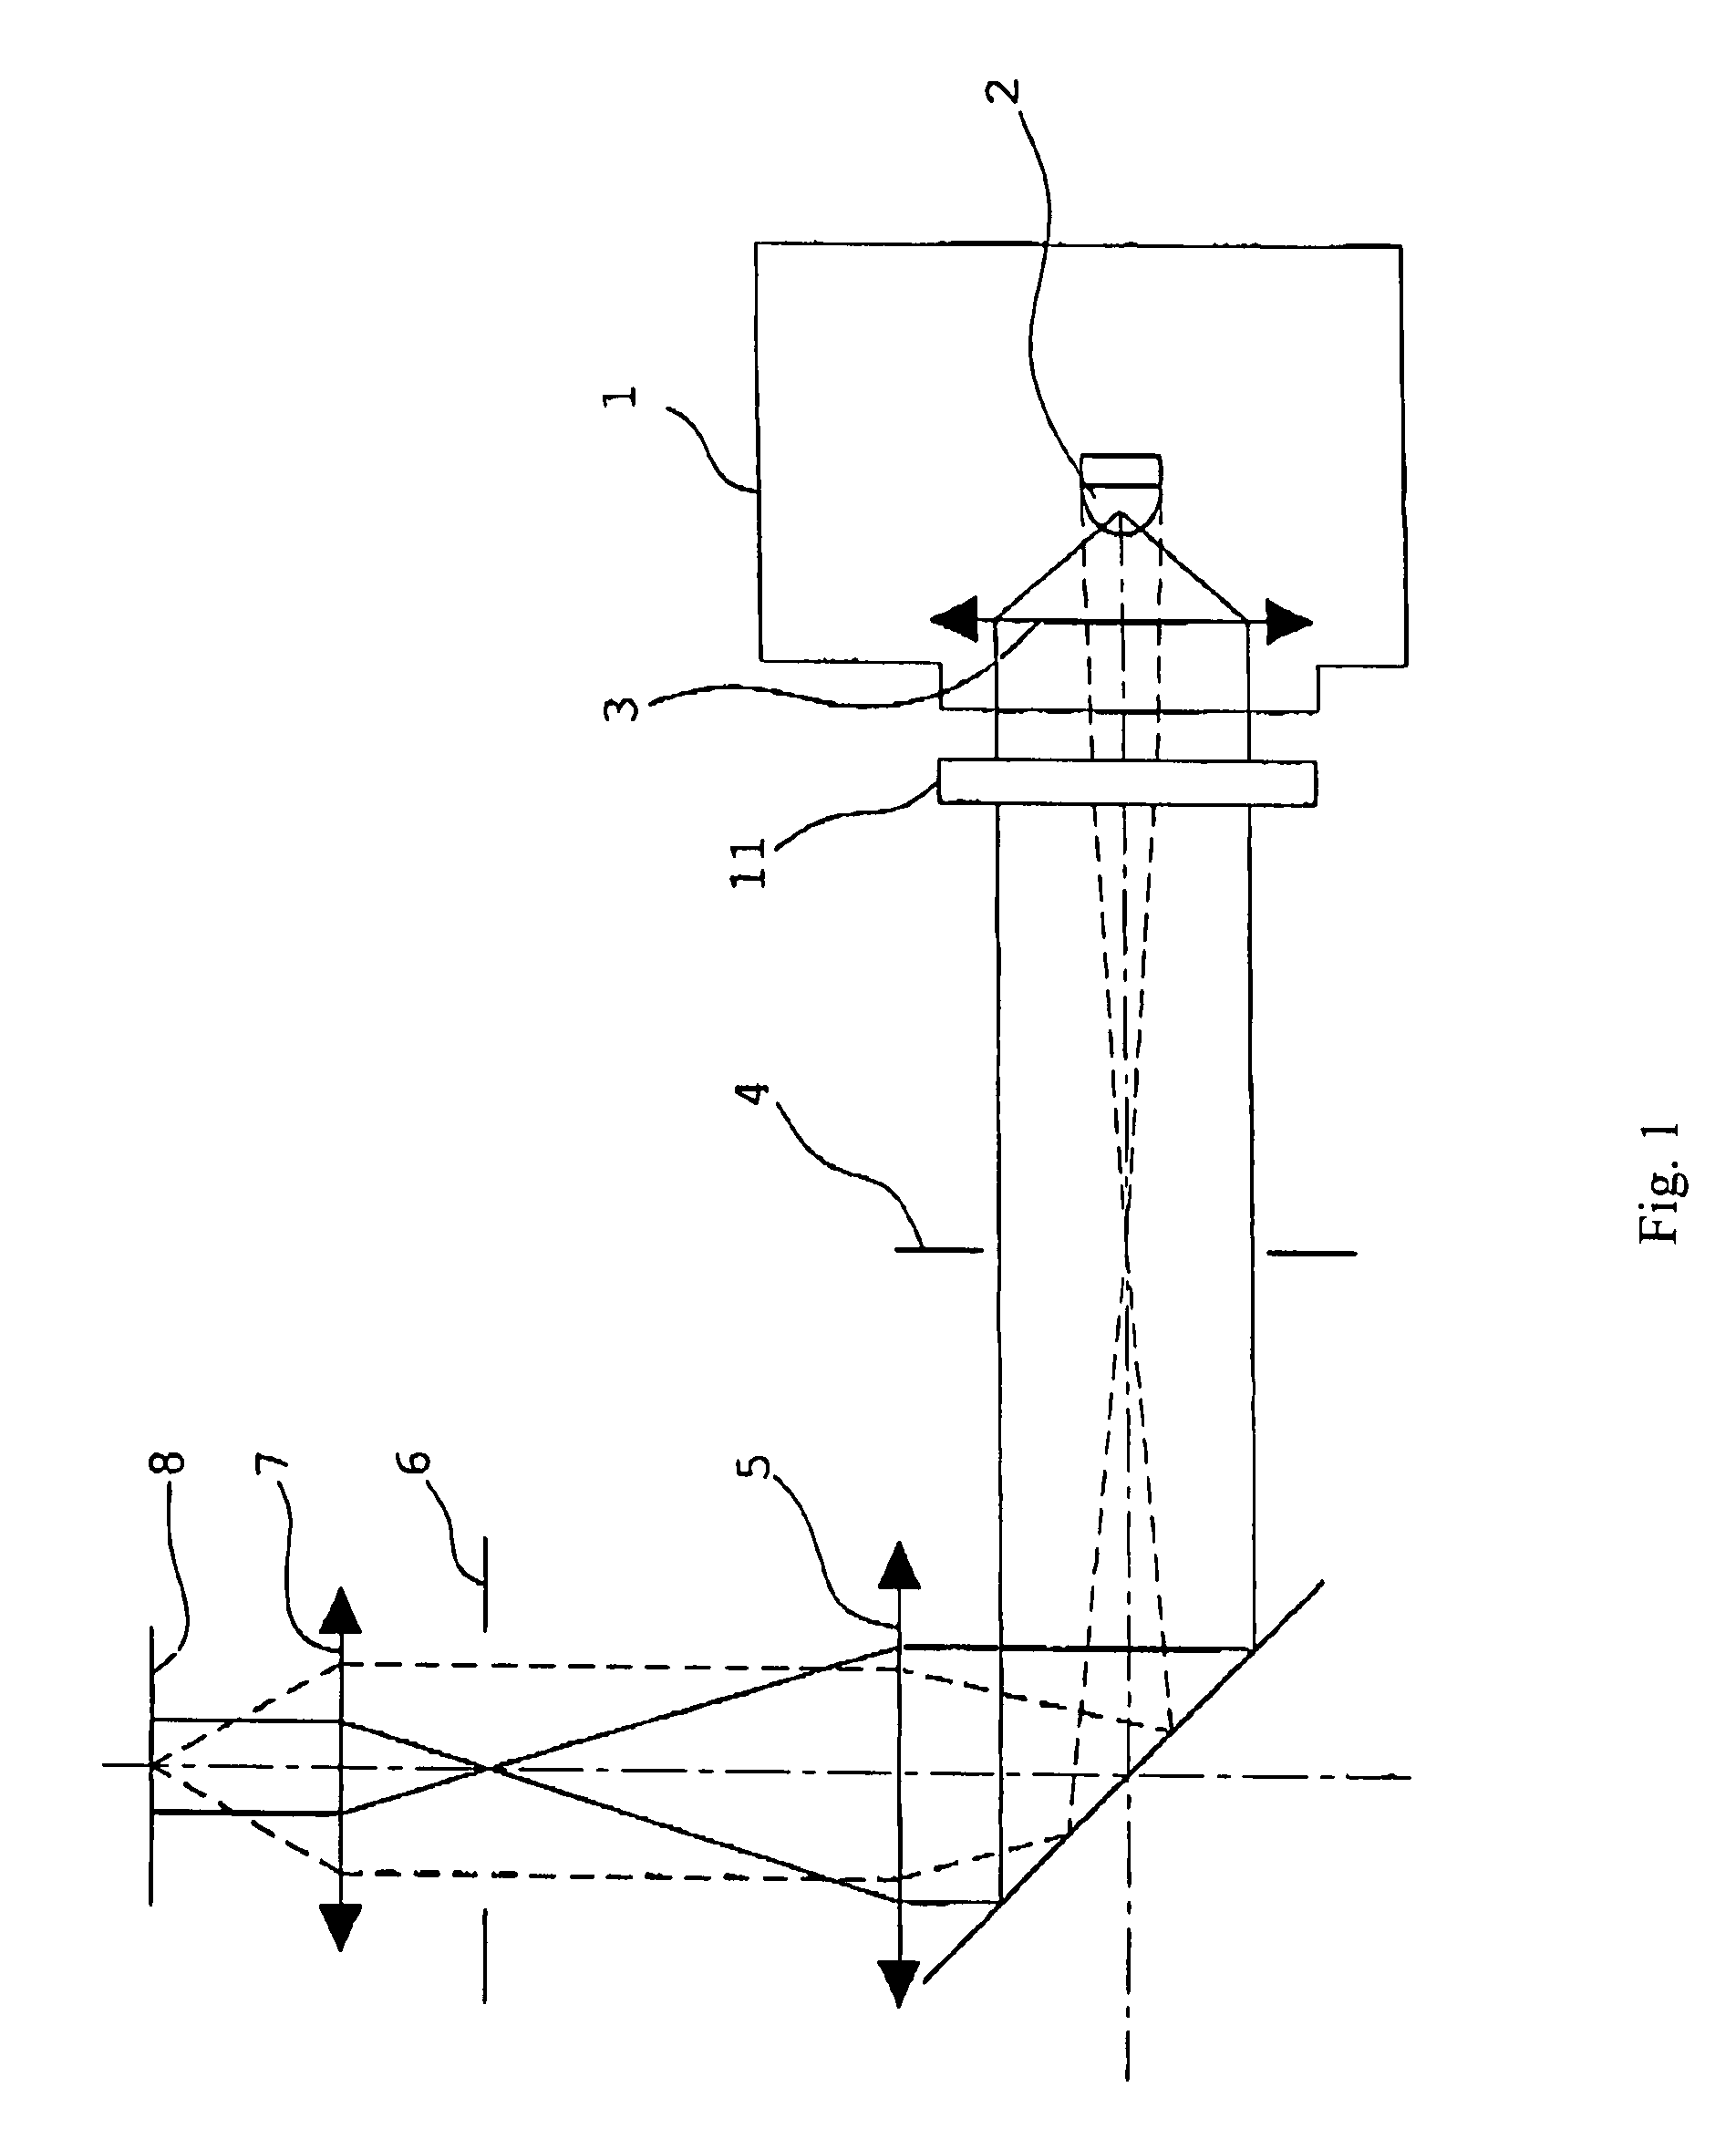 Illumination optical system that uses a solid-state lighting element which generates white light, and an optical device equipped therewith